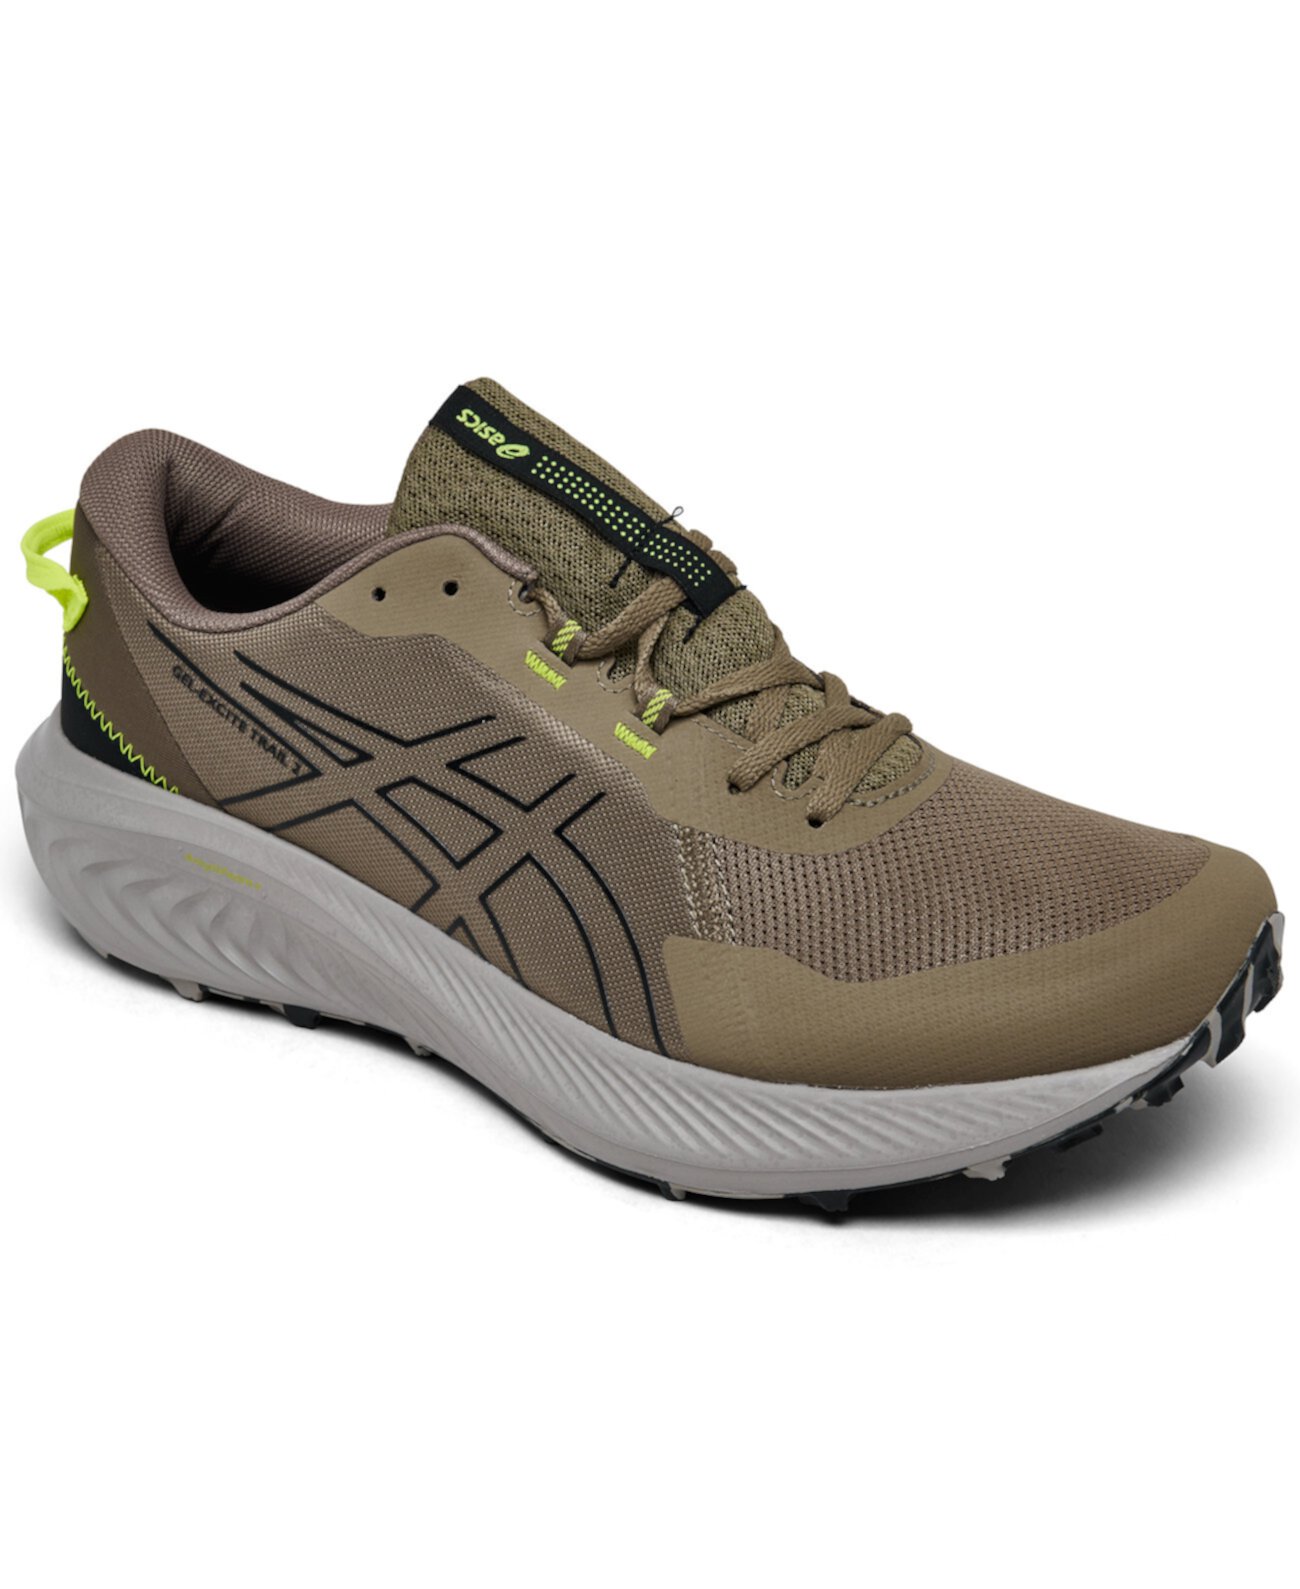 Men's GEL-EXCITE 2 Trail Running Sneakers from Finish Line ASICS